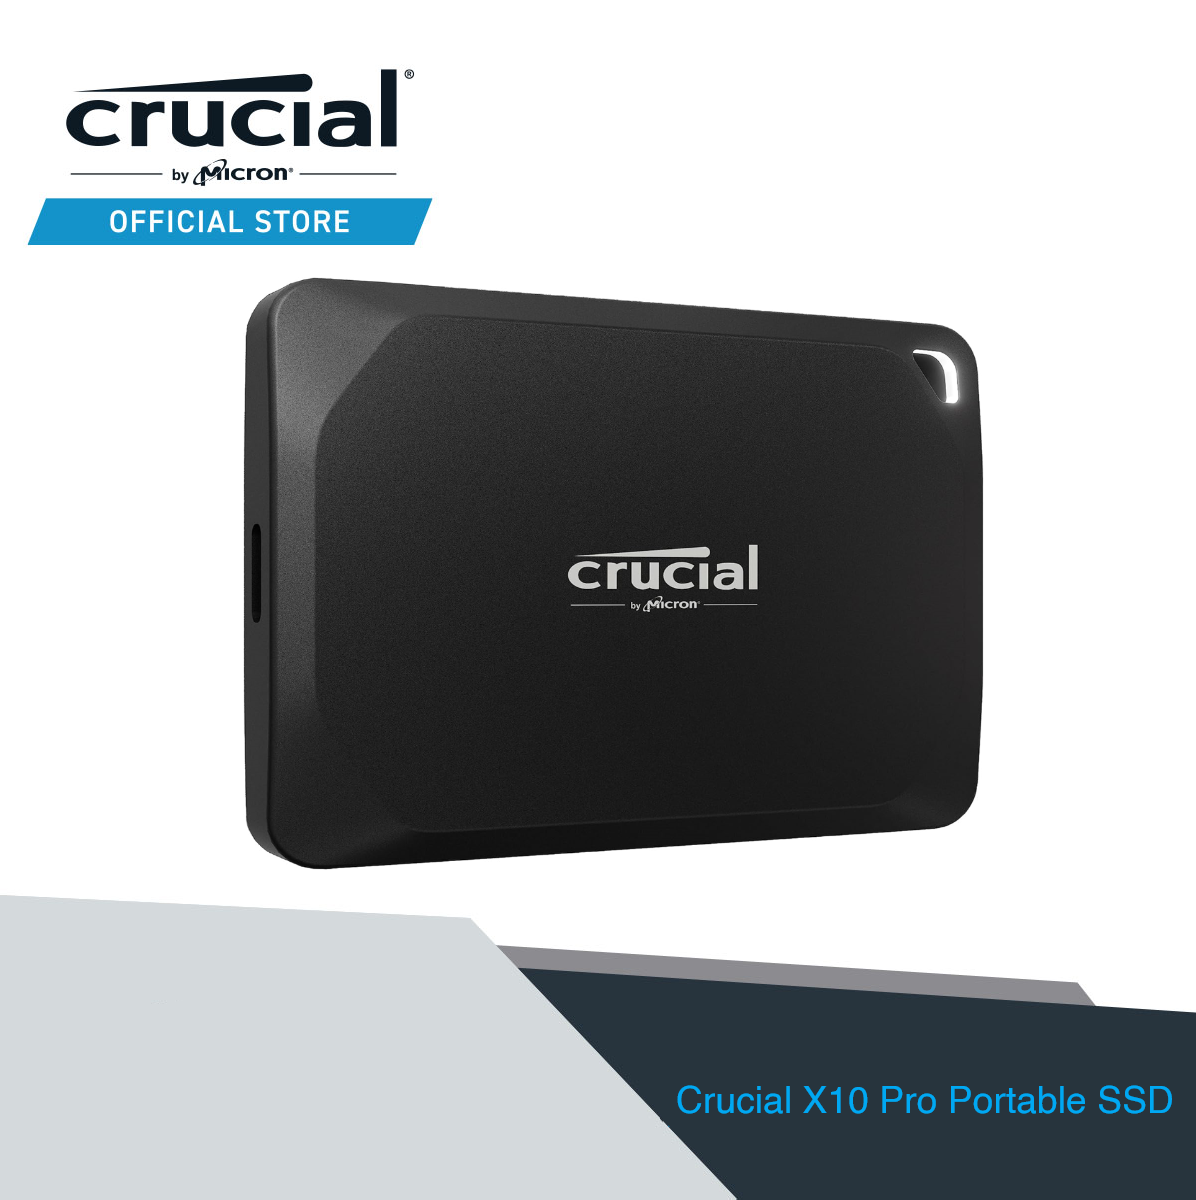 Micron launches Crucial X9 Pro and Crucial X10 Pro portable SSDs